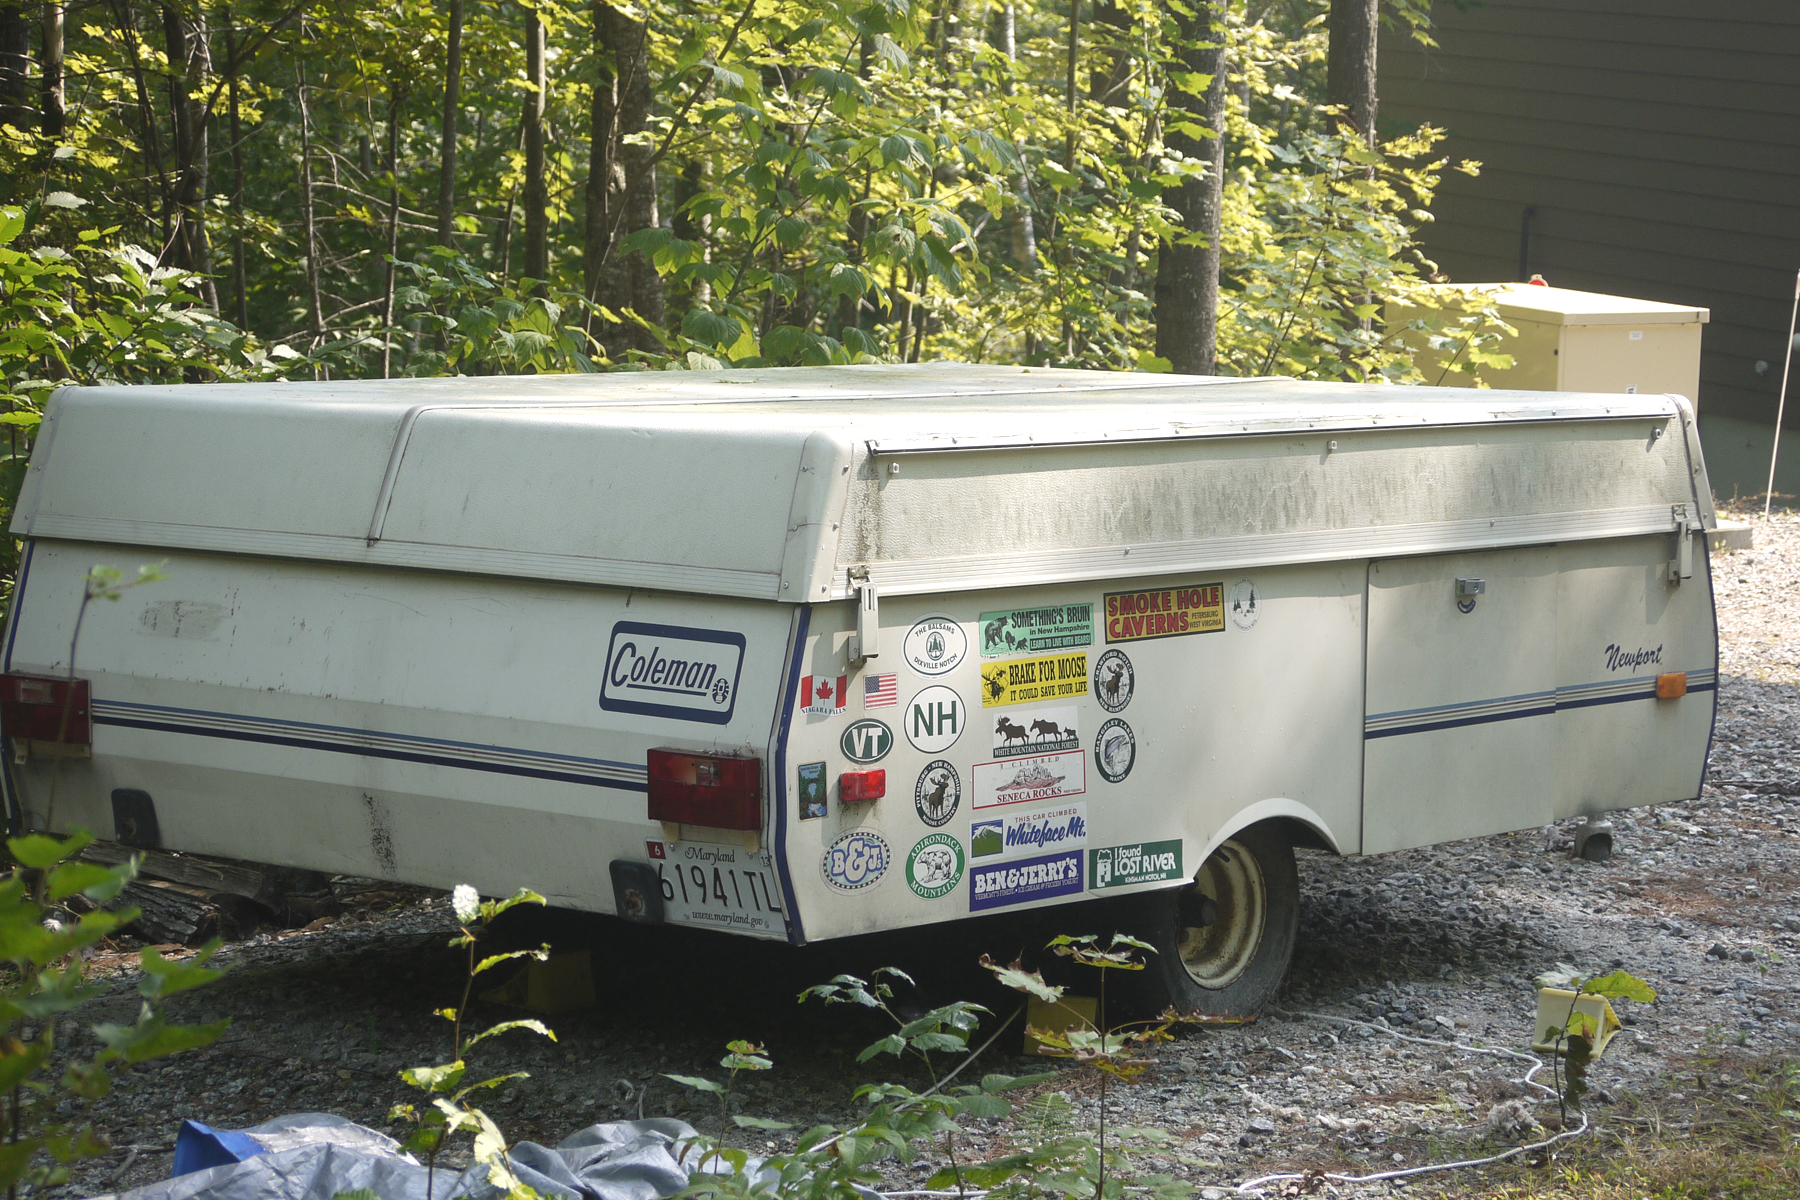 What are some highly rated Fleetwood pop-up trailers?